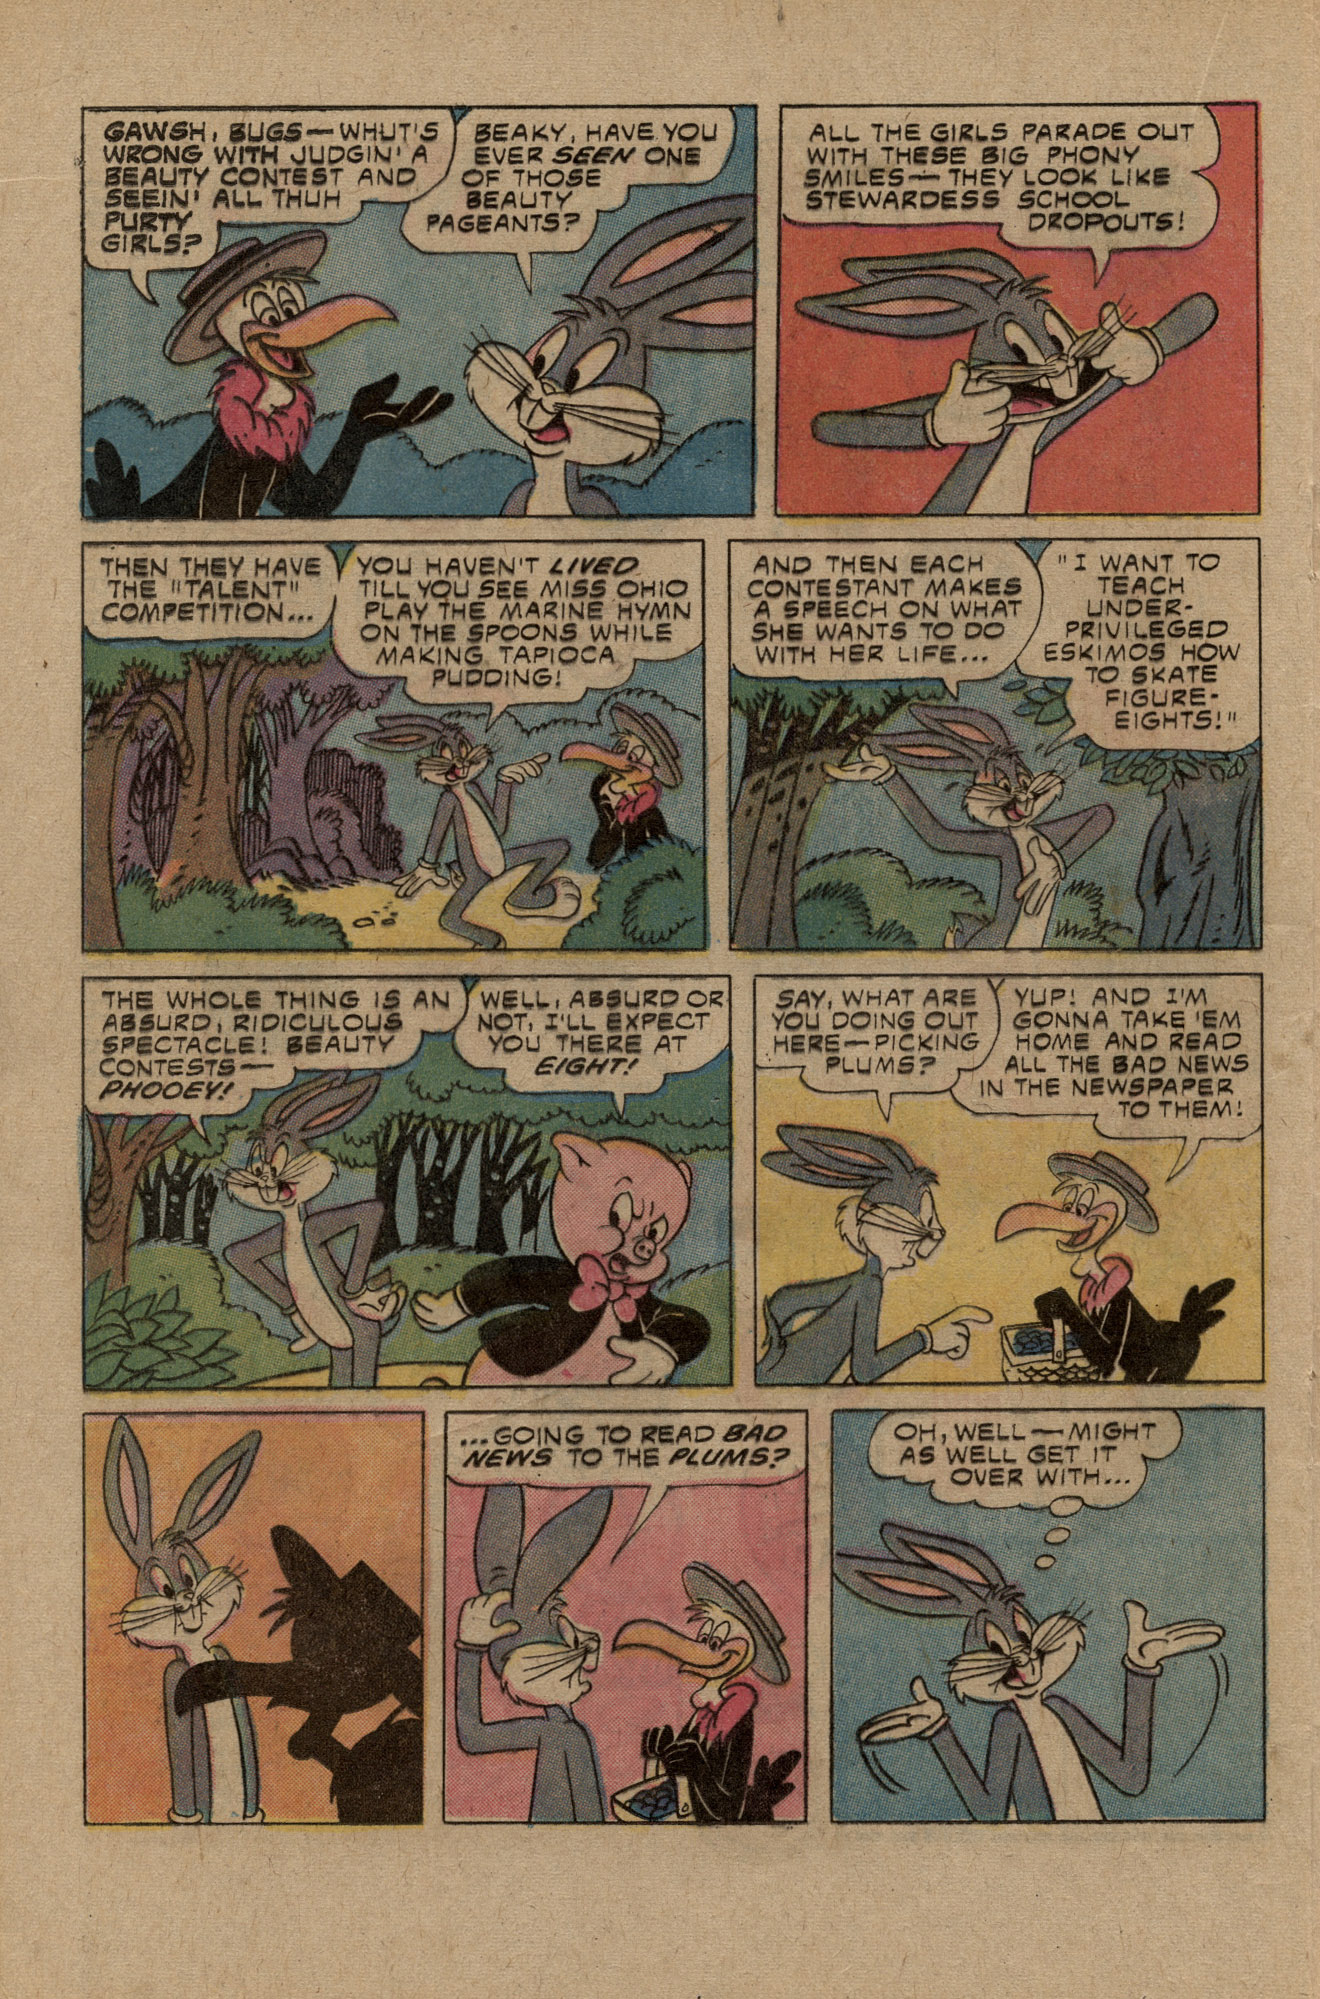 Read online Bugs Bunny comic -  Issue #166 - 20